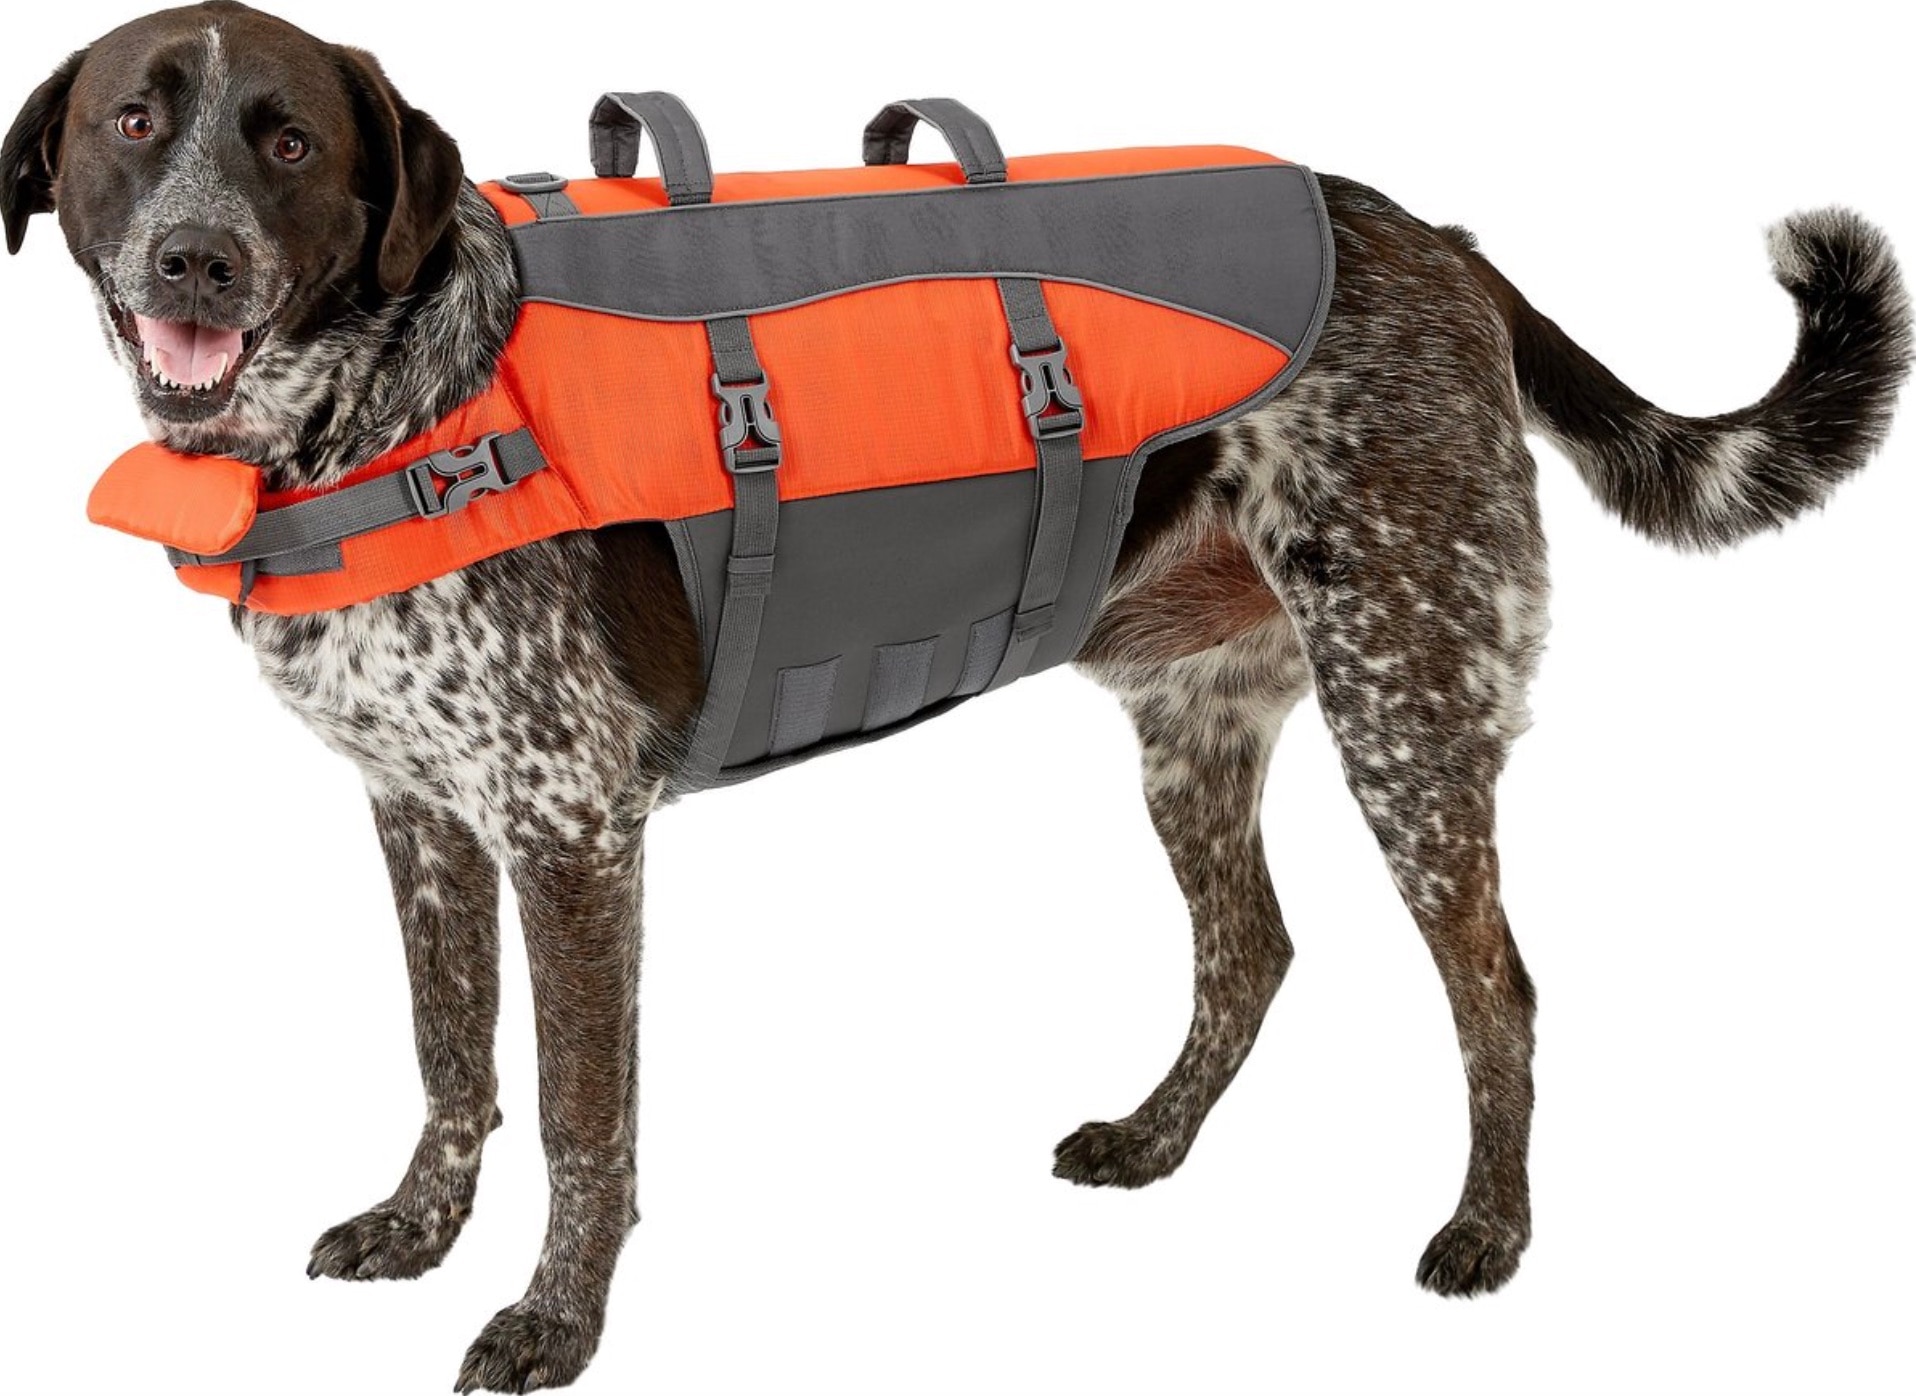 dog wearing orange and gray life jacket with handles on top